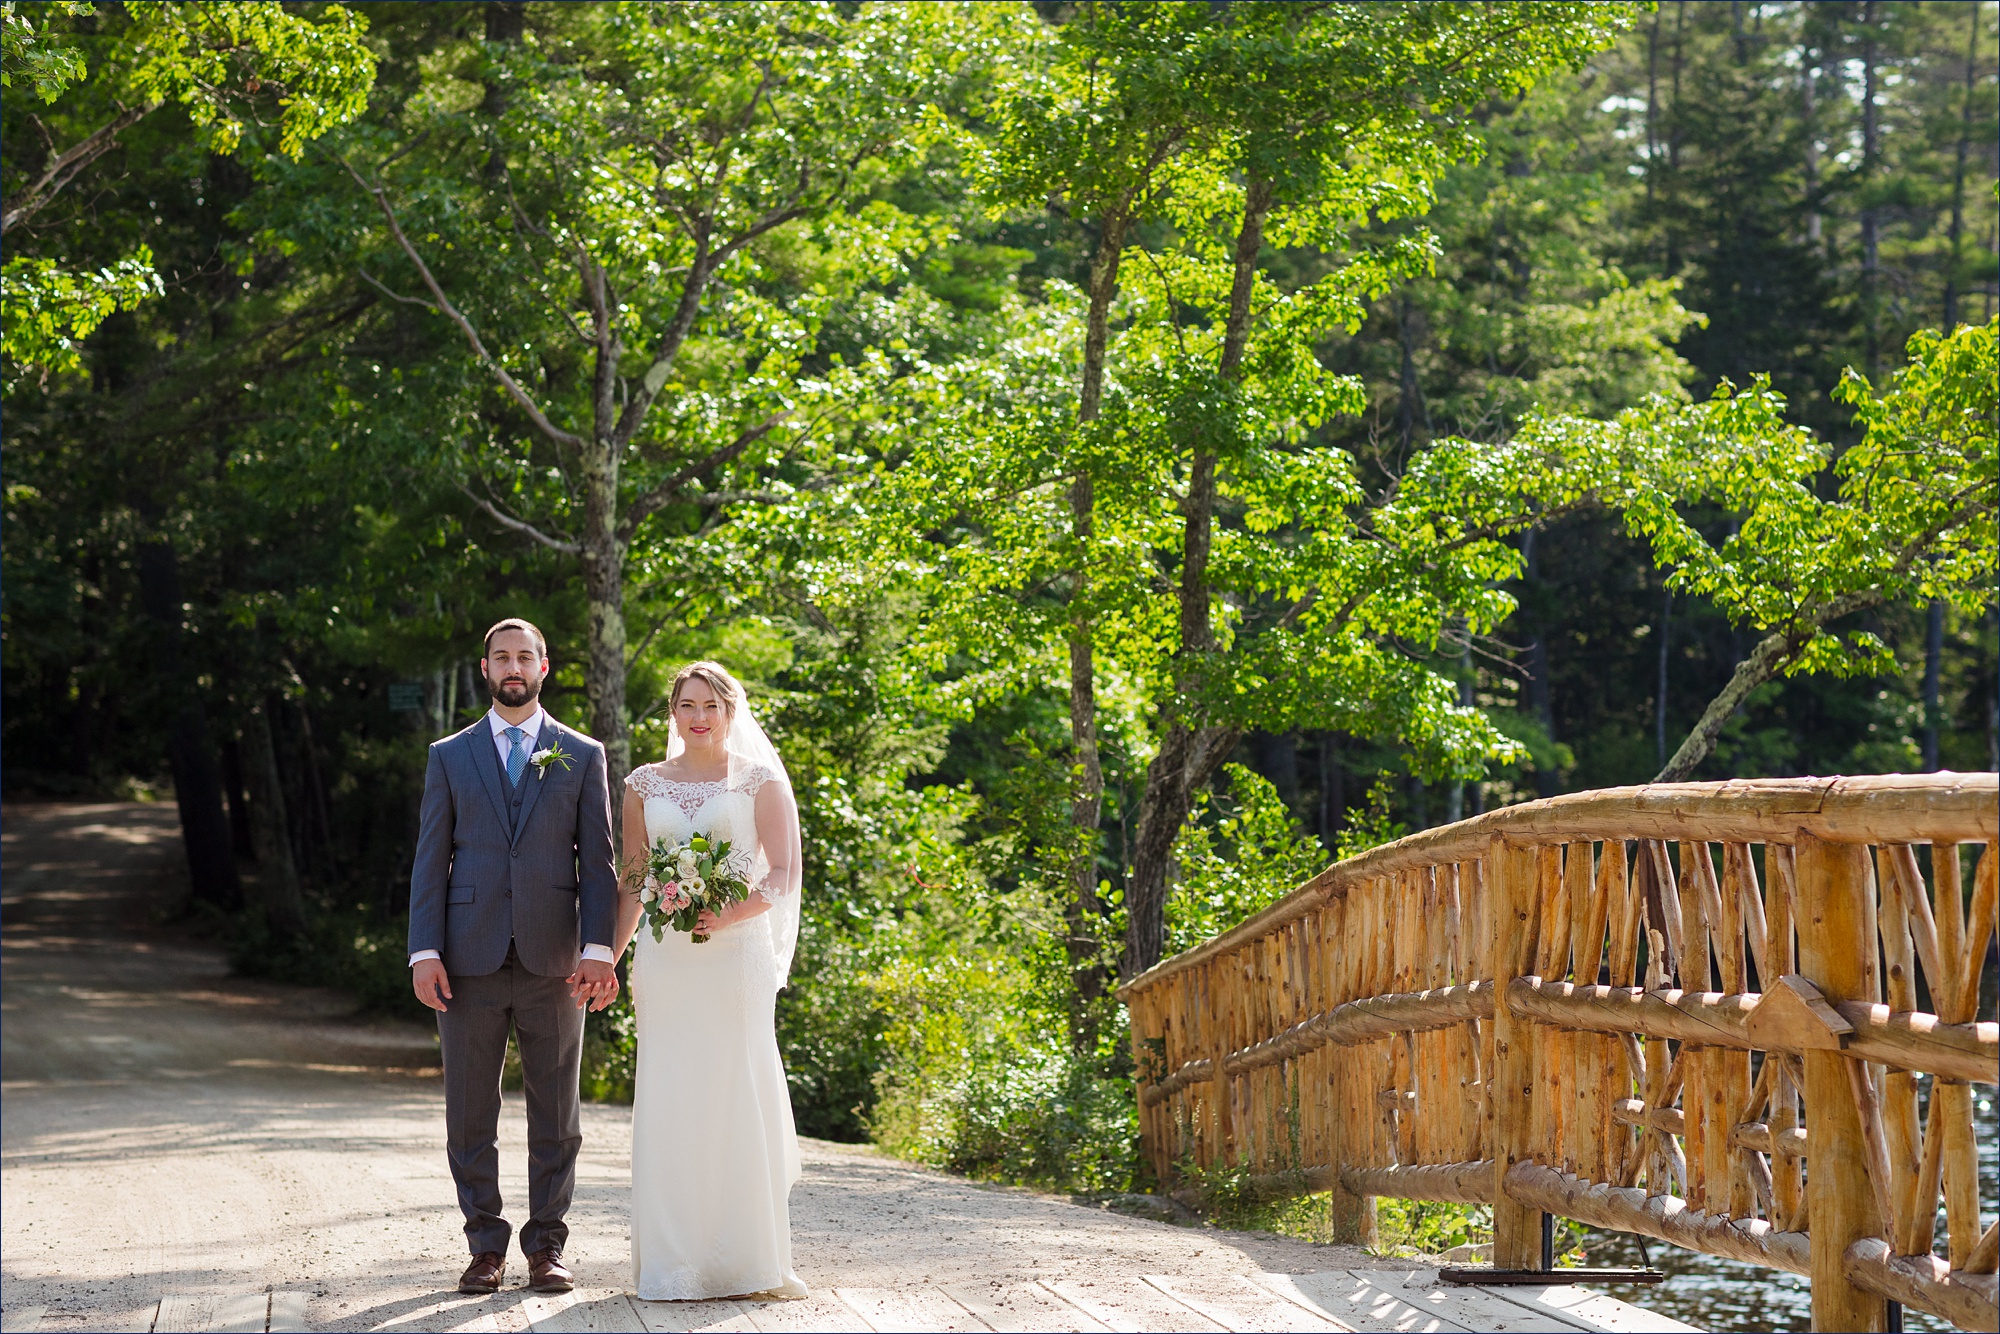 The newlyweds get ready to cross the bridge over Lake Chocorua New Hampshire after their wedding